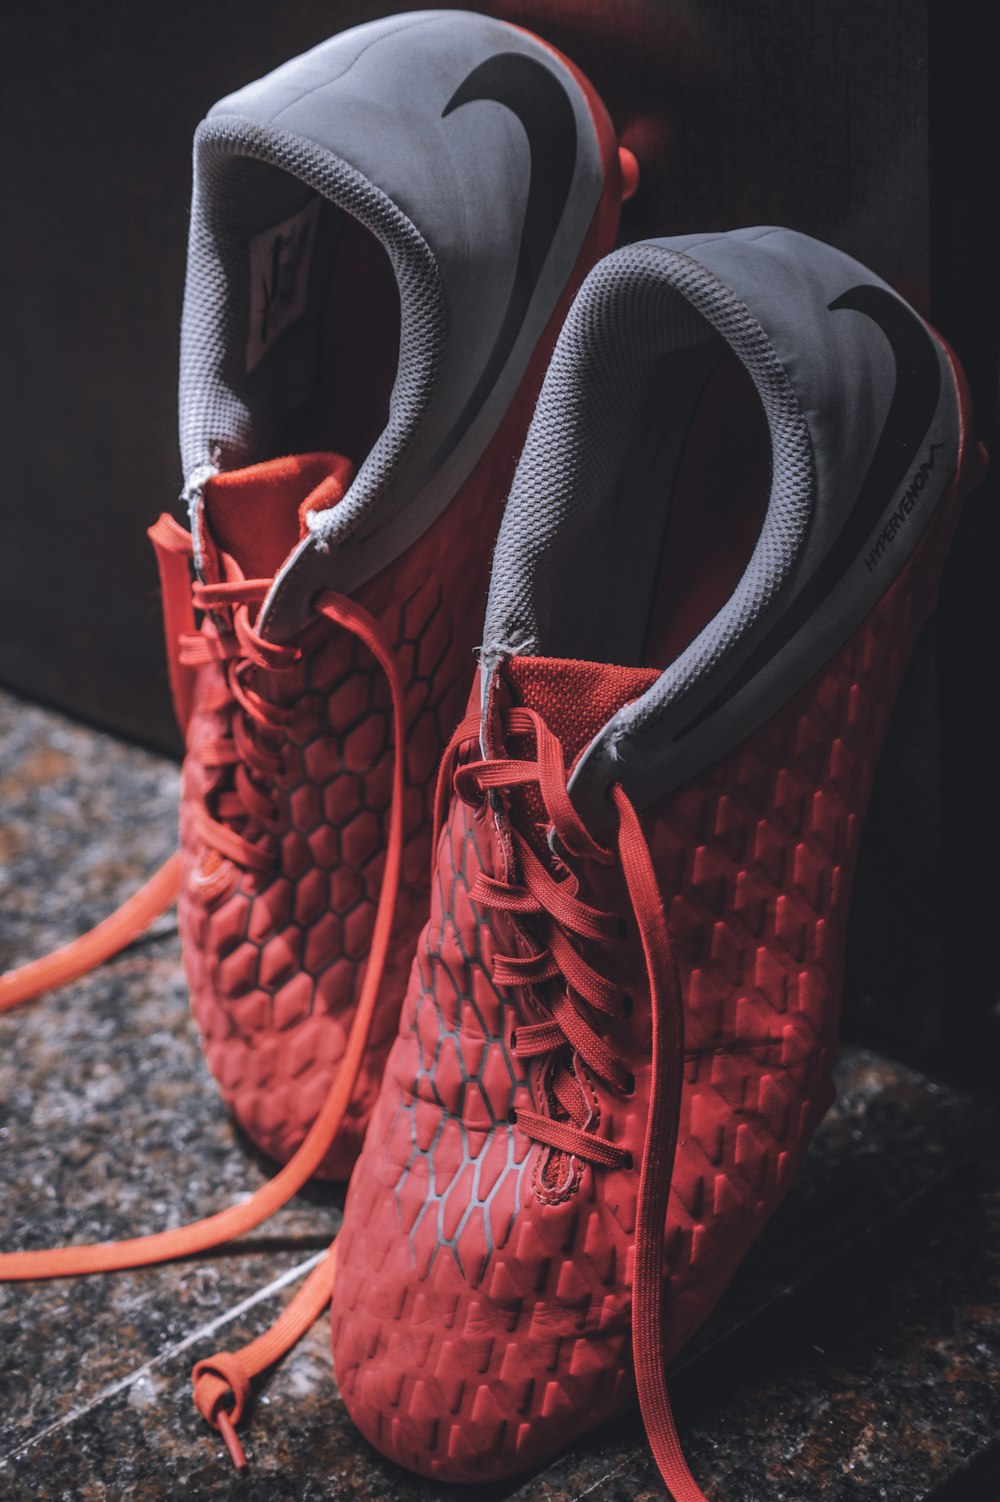 pair of grey and red shoes close-up photography